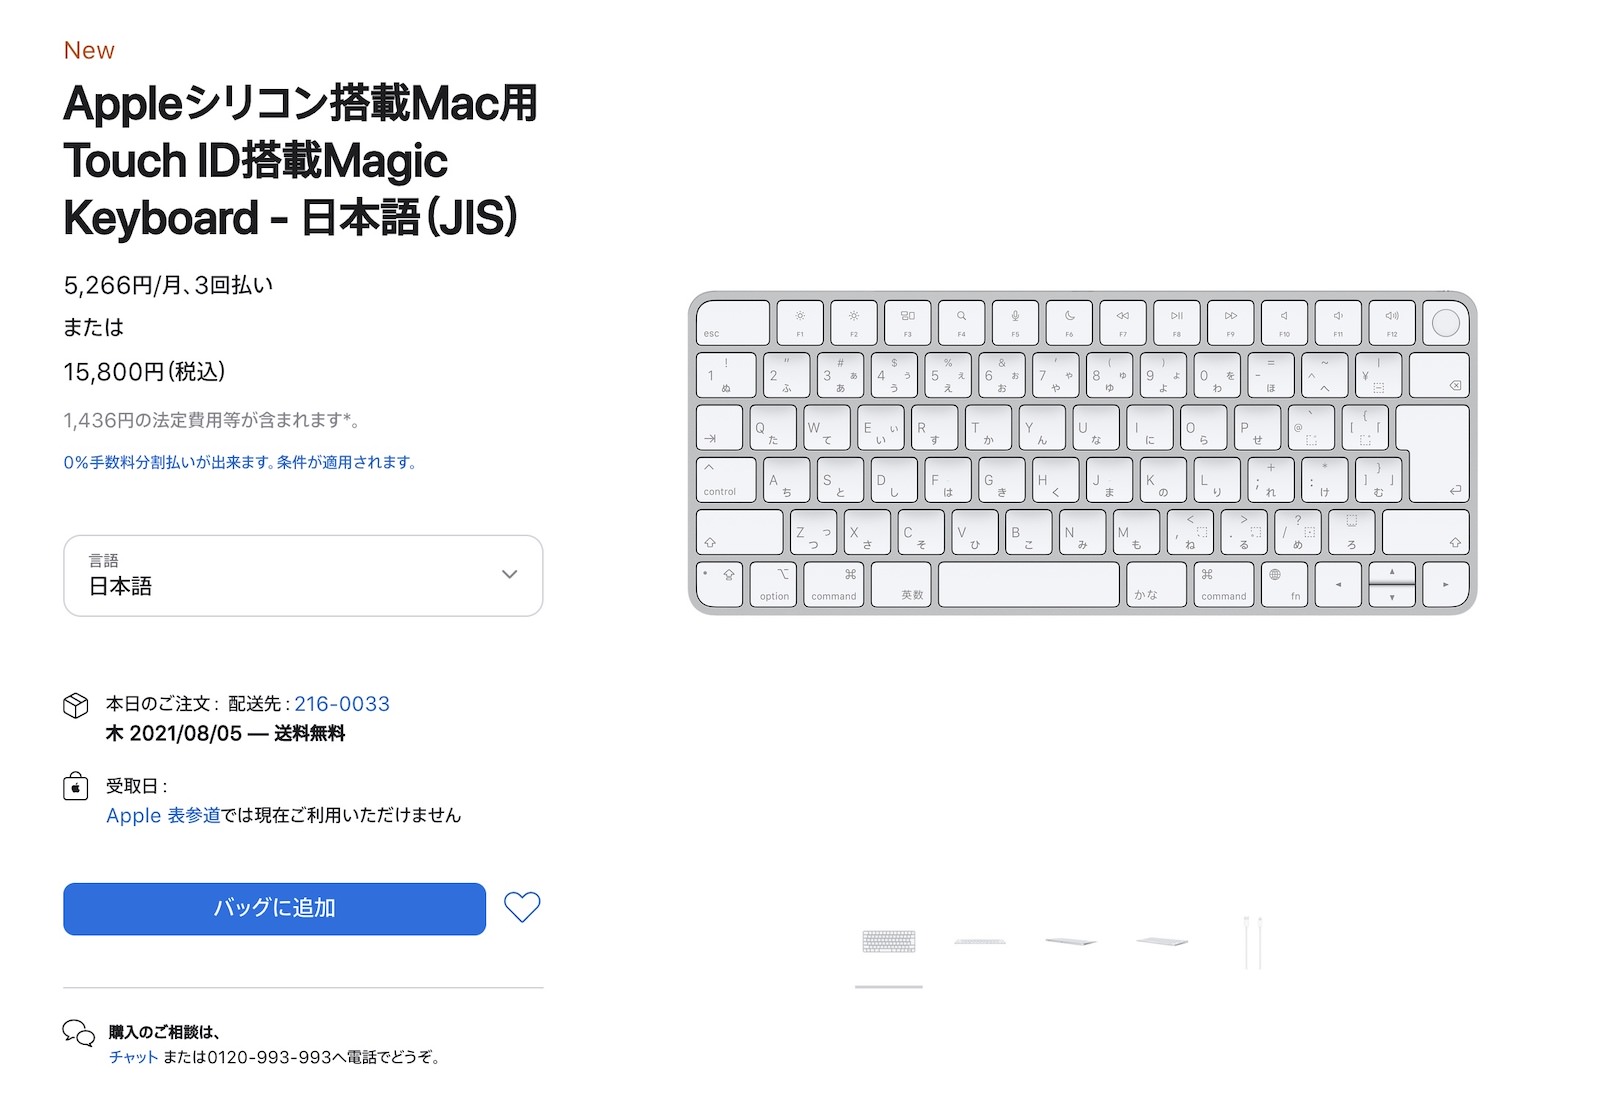 touch-id-magic-keyboard-now-on-sale.jpg